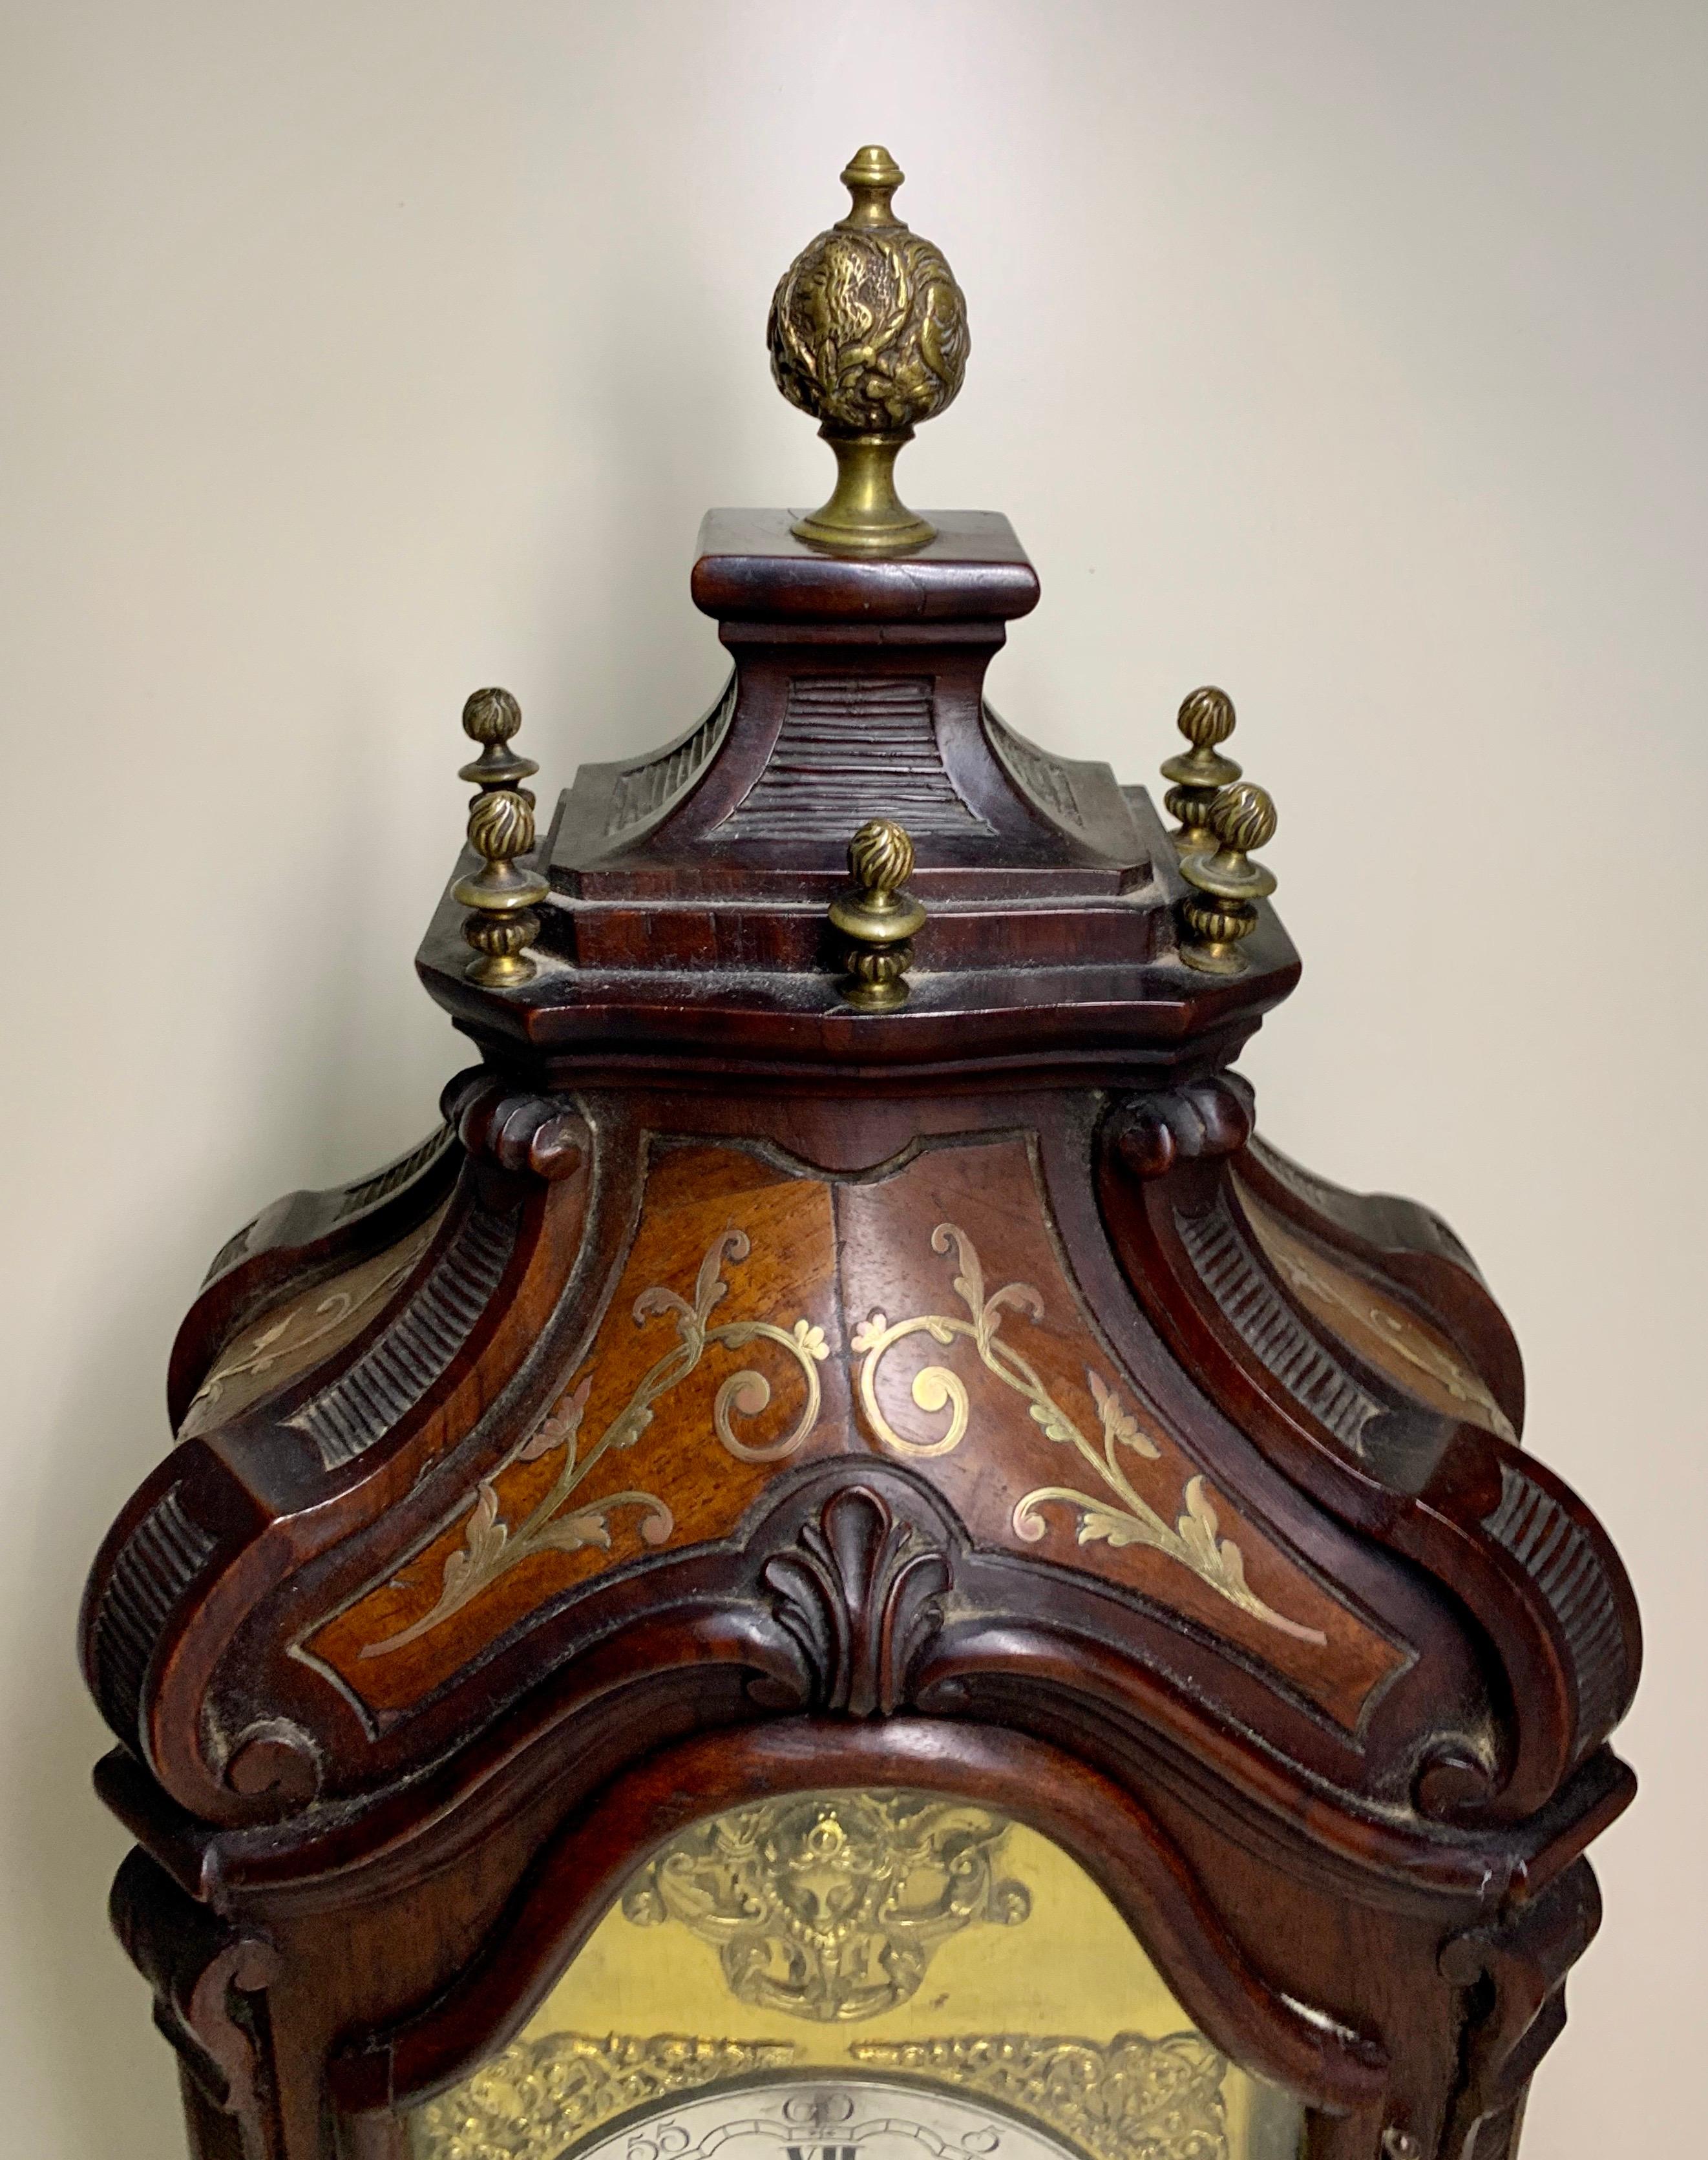 A nice striking mantel clock on stand made by Planchon A Paris.
The rich decorated case in dark Mahogany with gilt brass details looks just like boulle inlay.
The clock has a Silvered dial with Roman hour numerals, minute numbers and has the